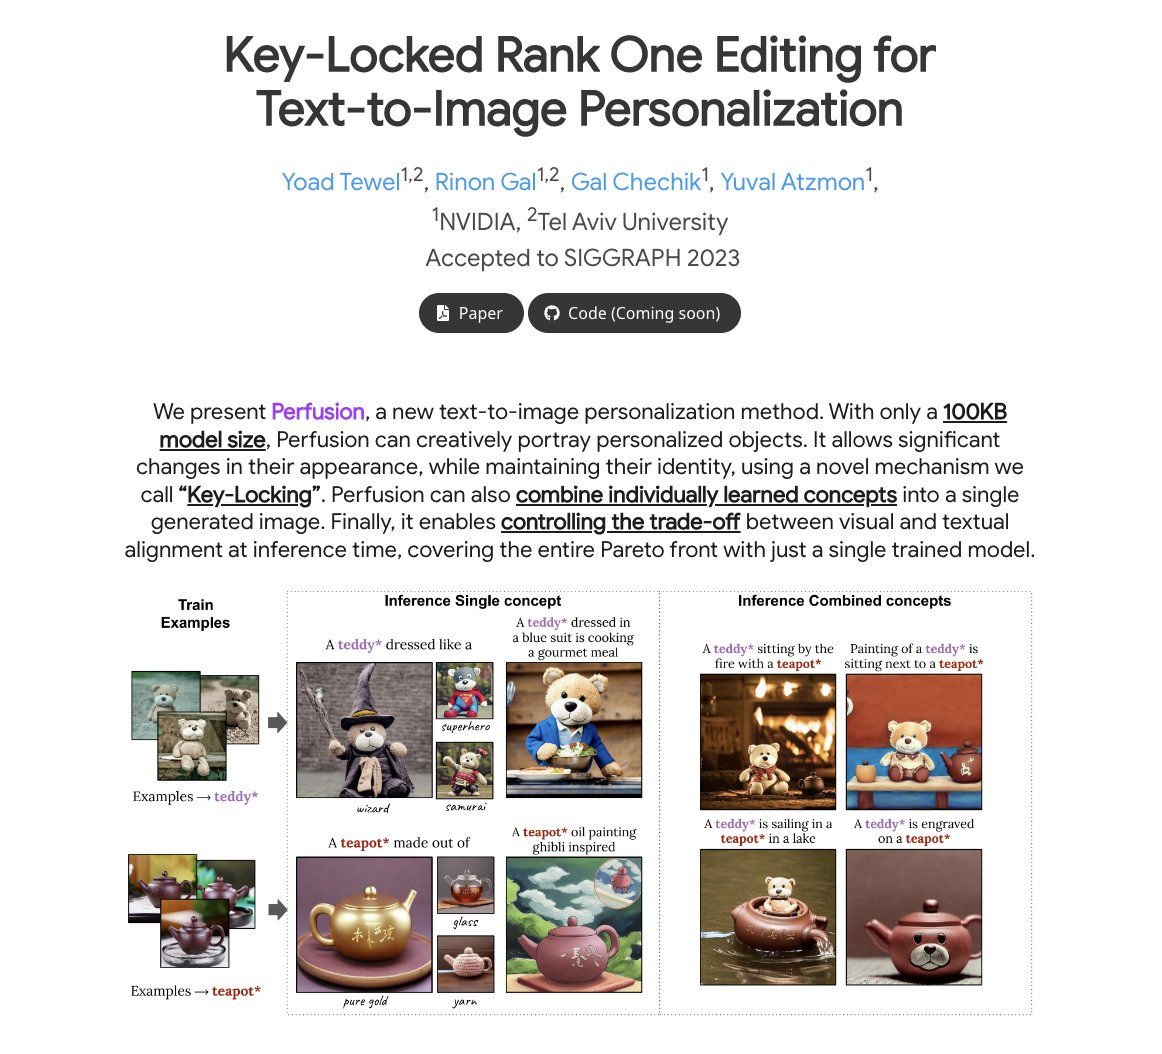 Key-Locked Rank One Editing for Text-to-Image Personalization

present Perfusion, a new text-to-image personalization method. With only a 100KB model size, Perfusion can creatively portray personalized objects. It allows significant changes in their appearance, while maintaining…